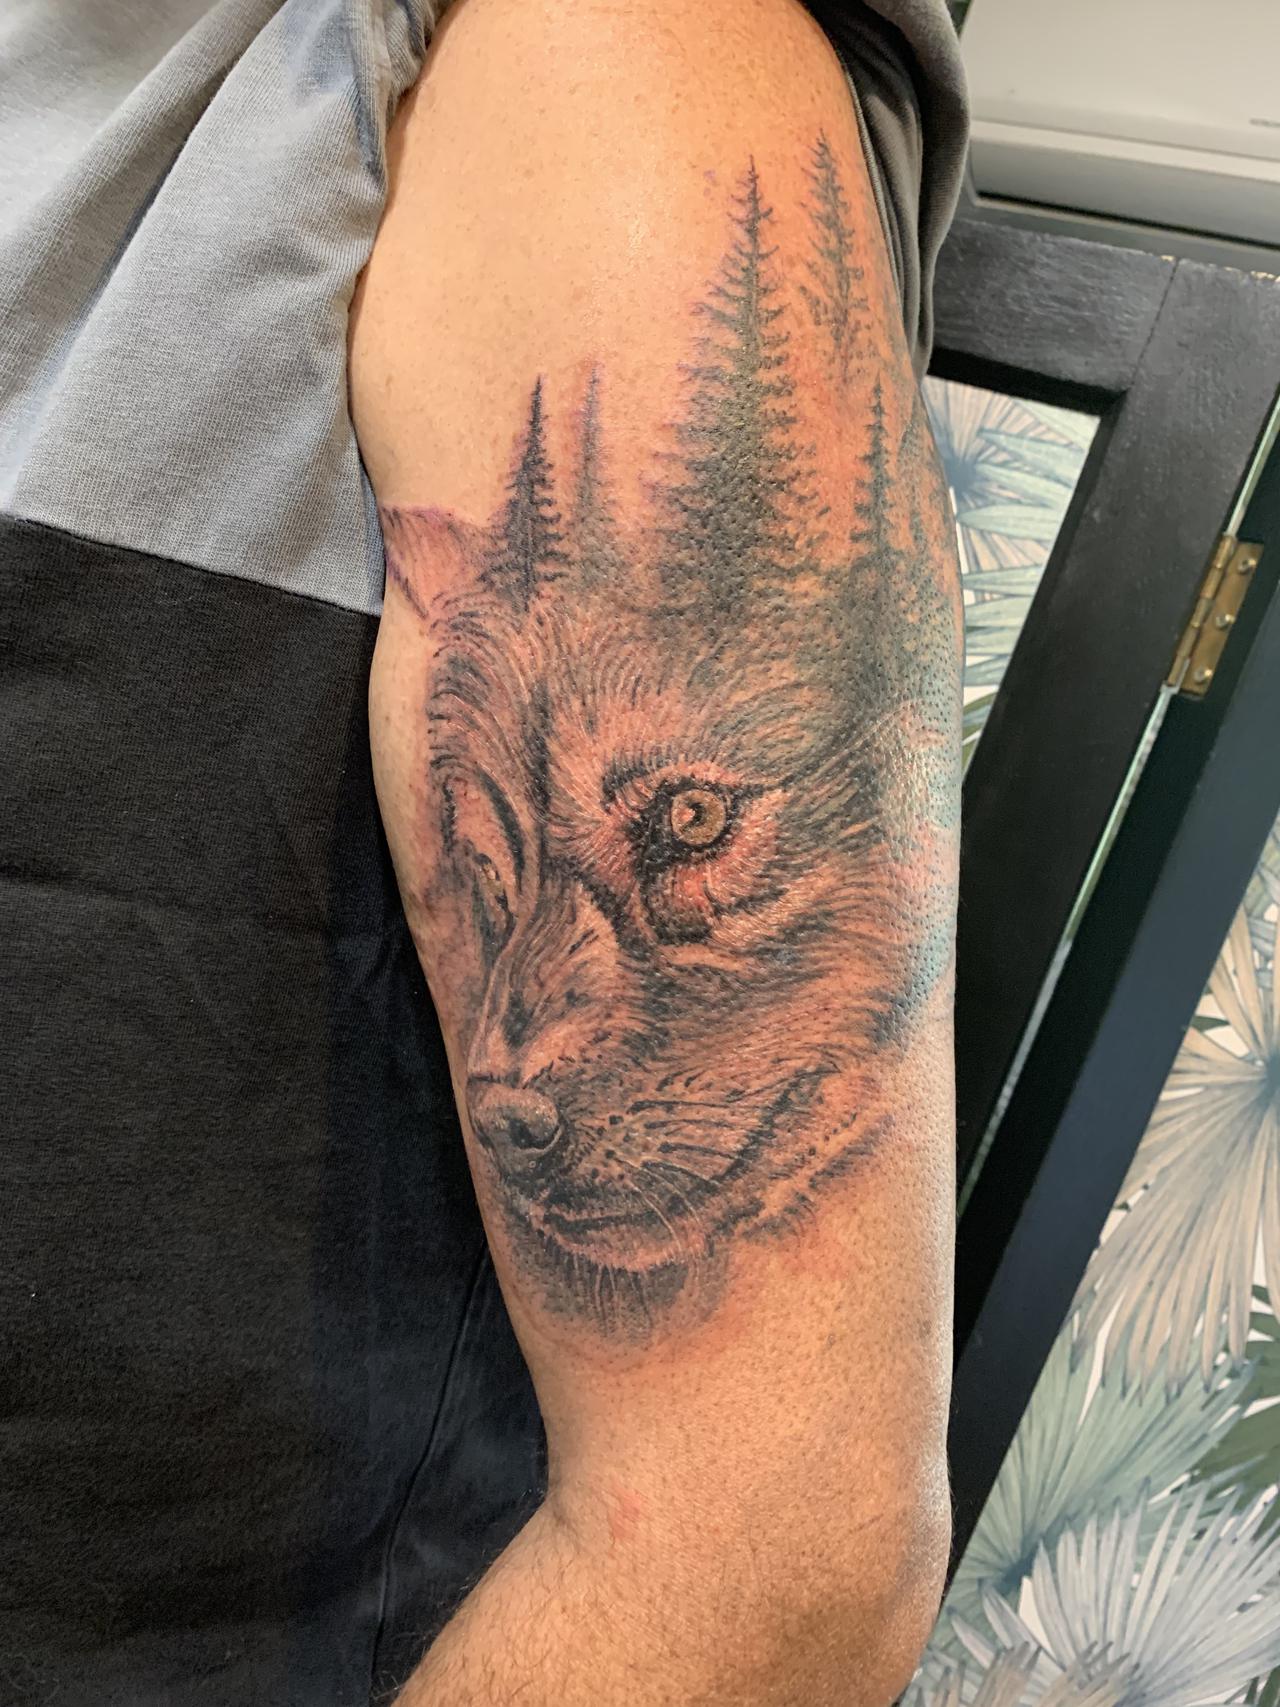 Recouvrement tattoo cover loup